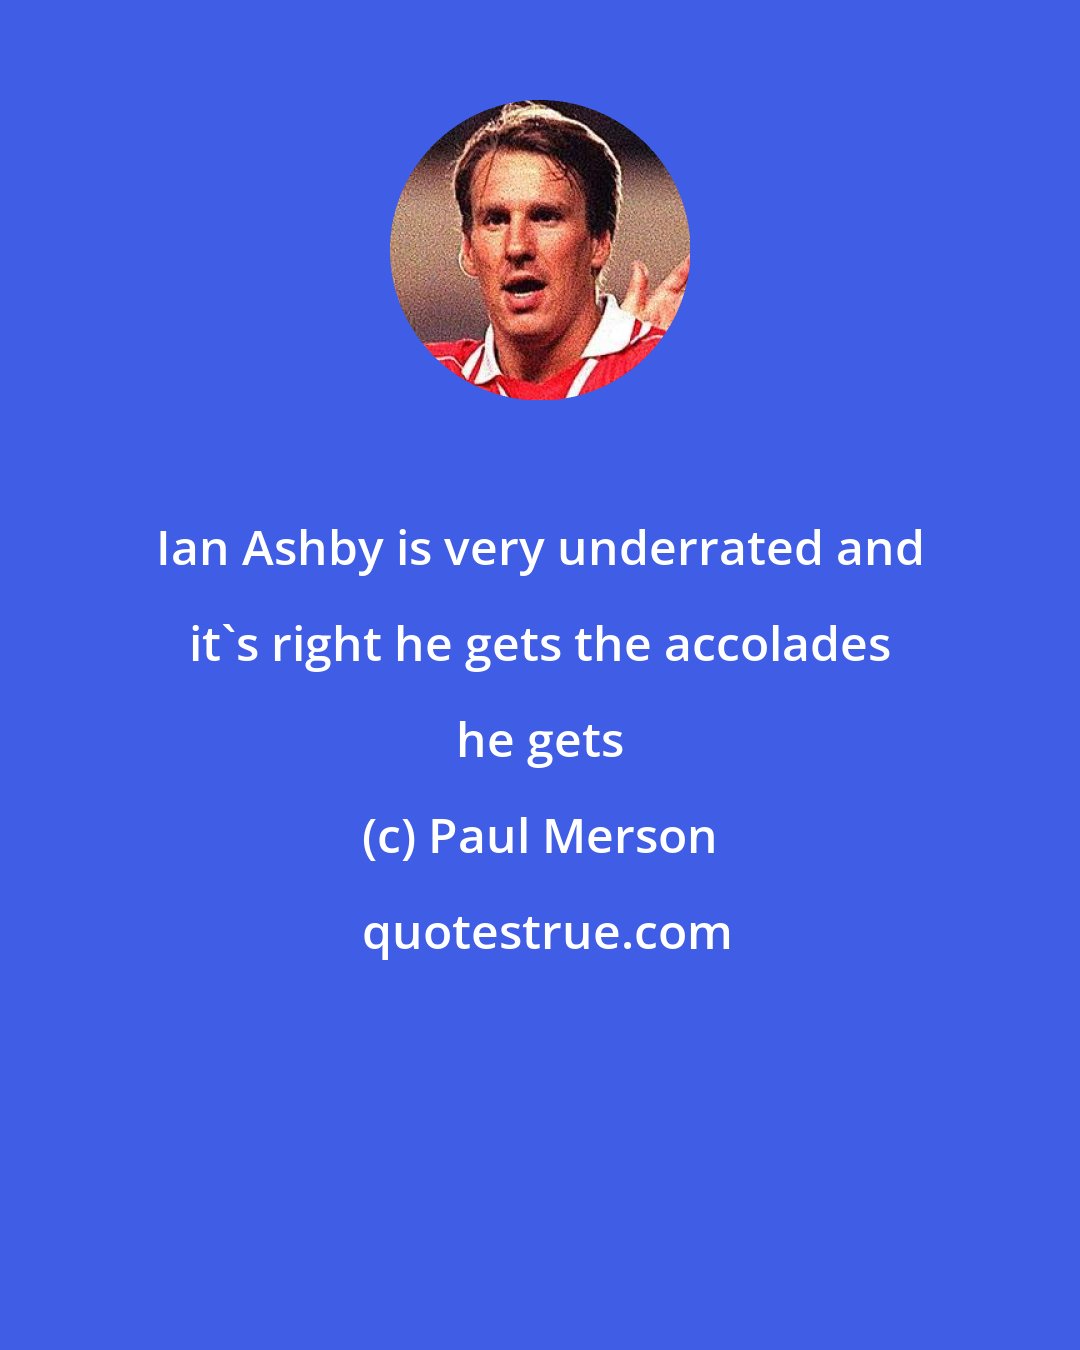 Paul Merson: Ian Ashby is very underrated and it's right he gets the accolades he gets